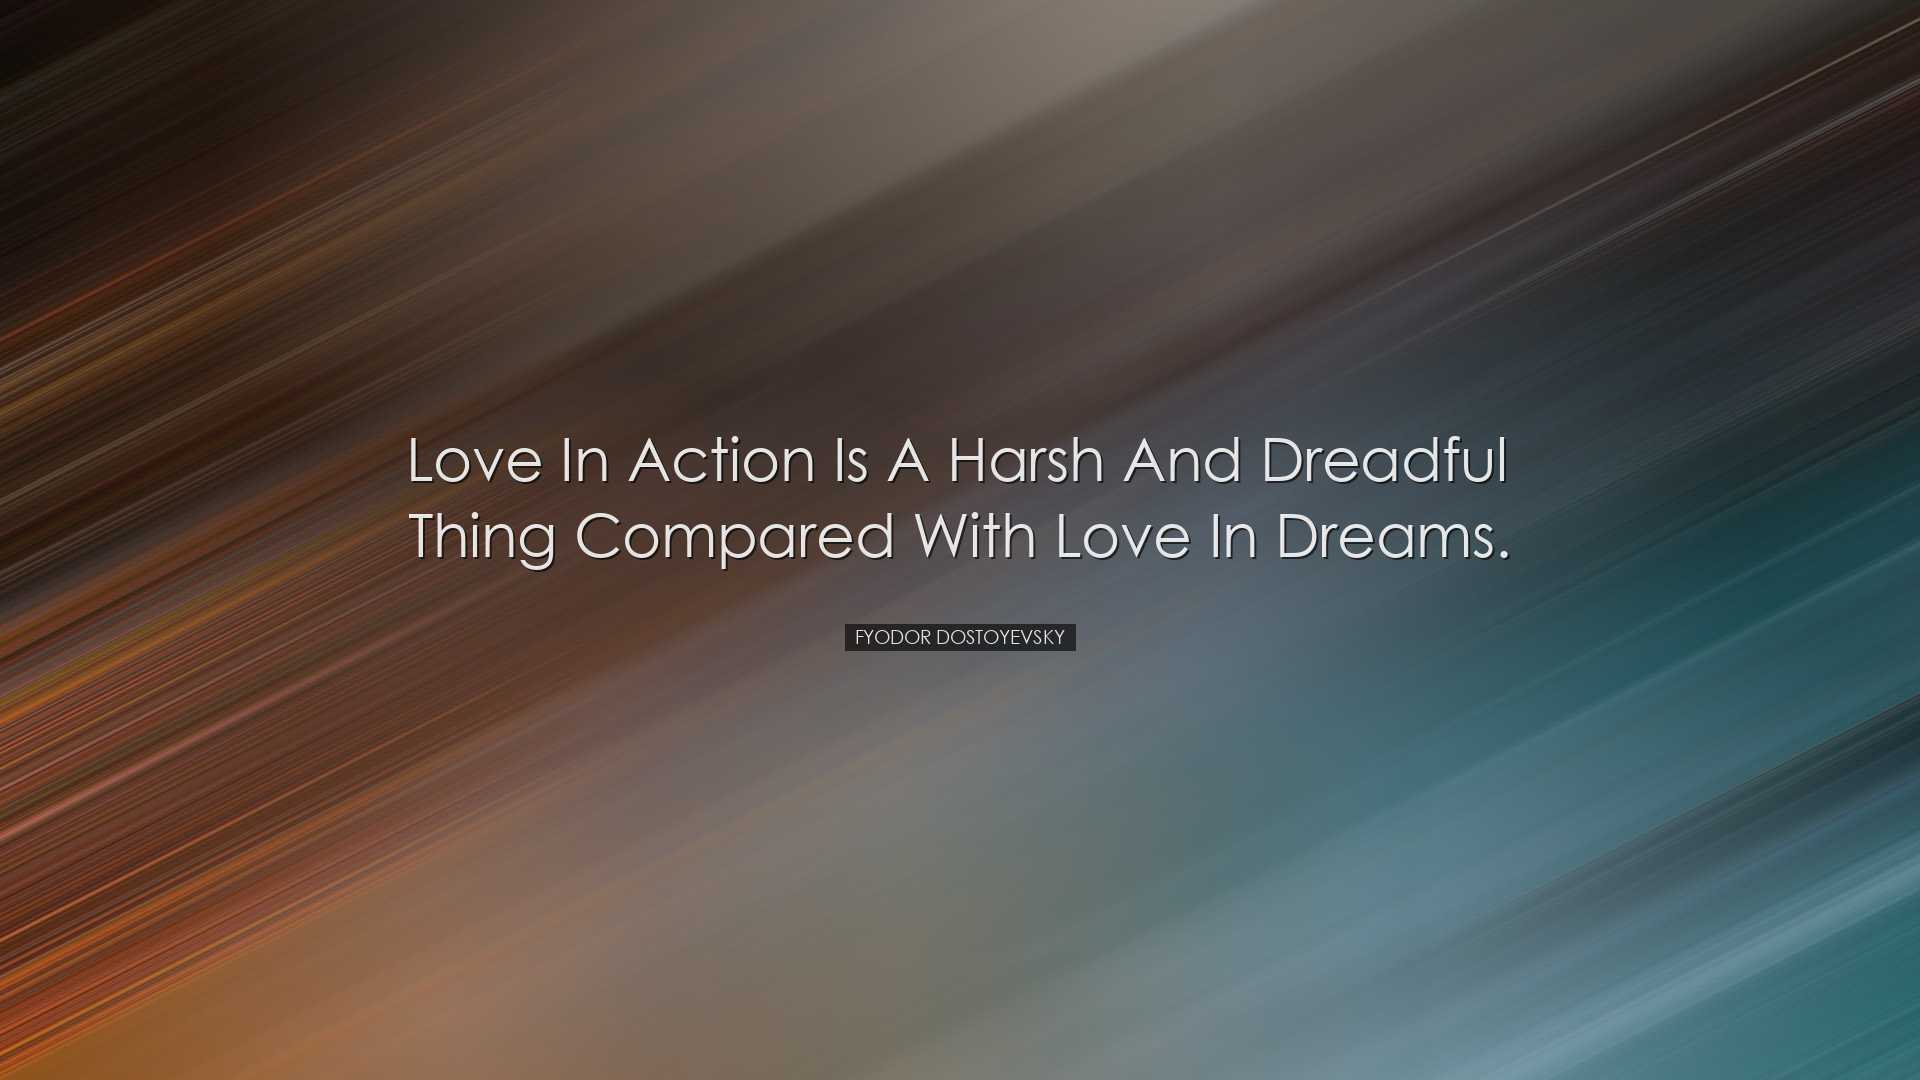 Love in action is a harsh and dreadful thing compared with love in